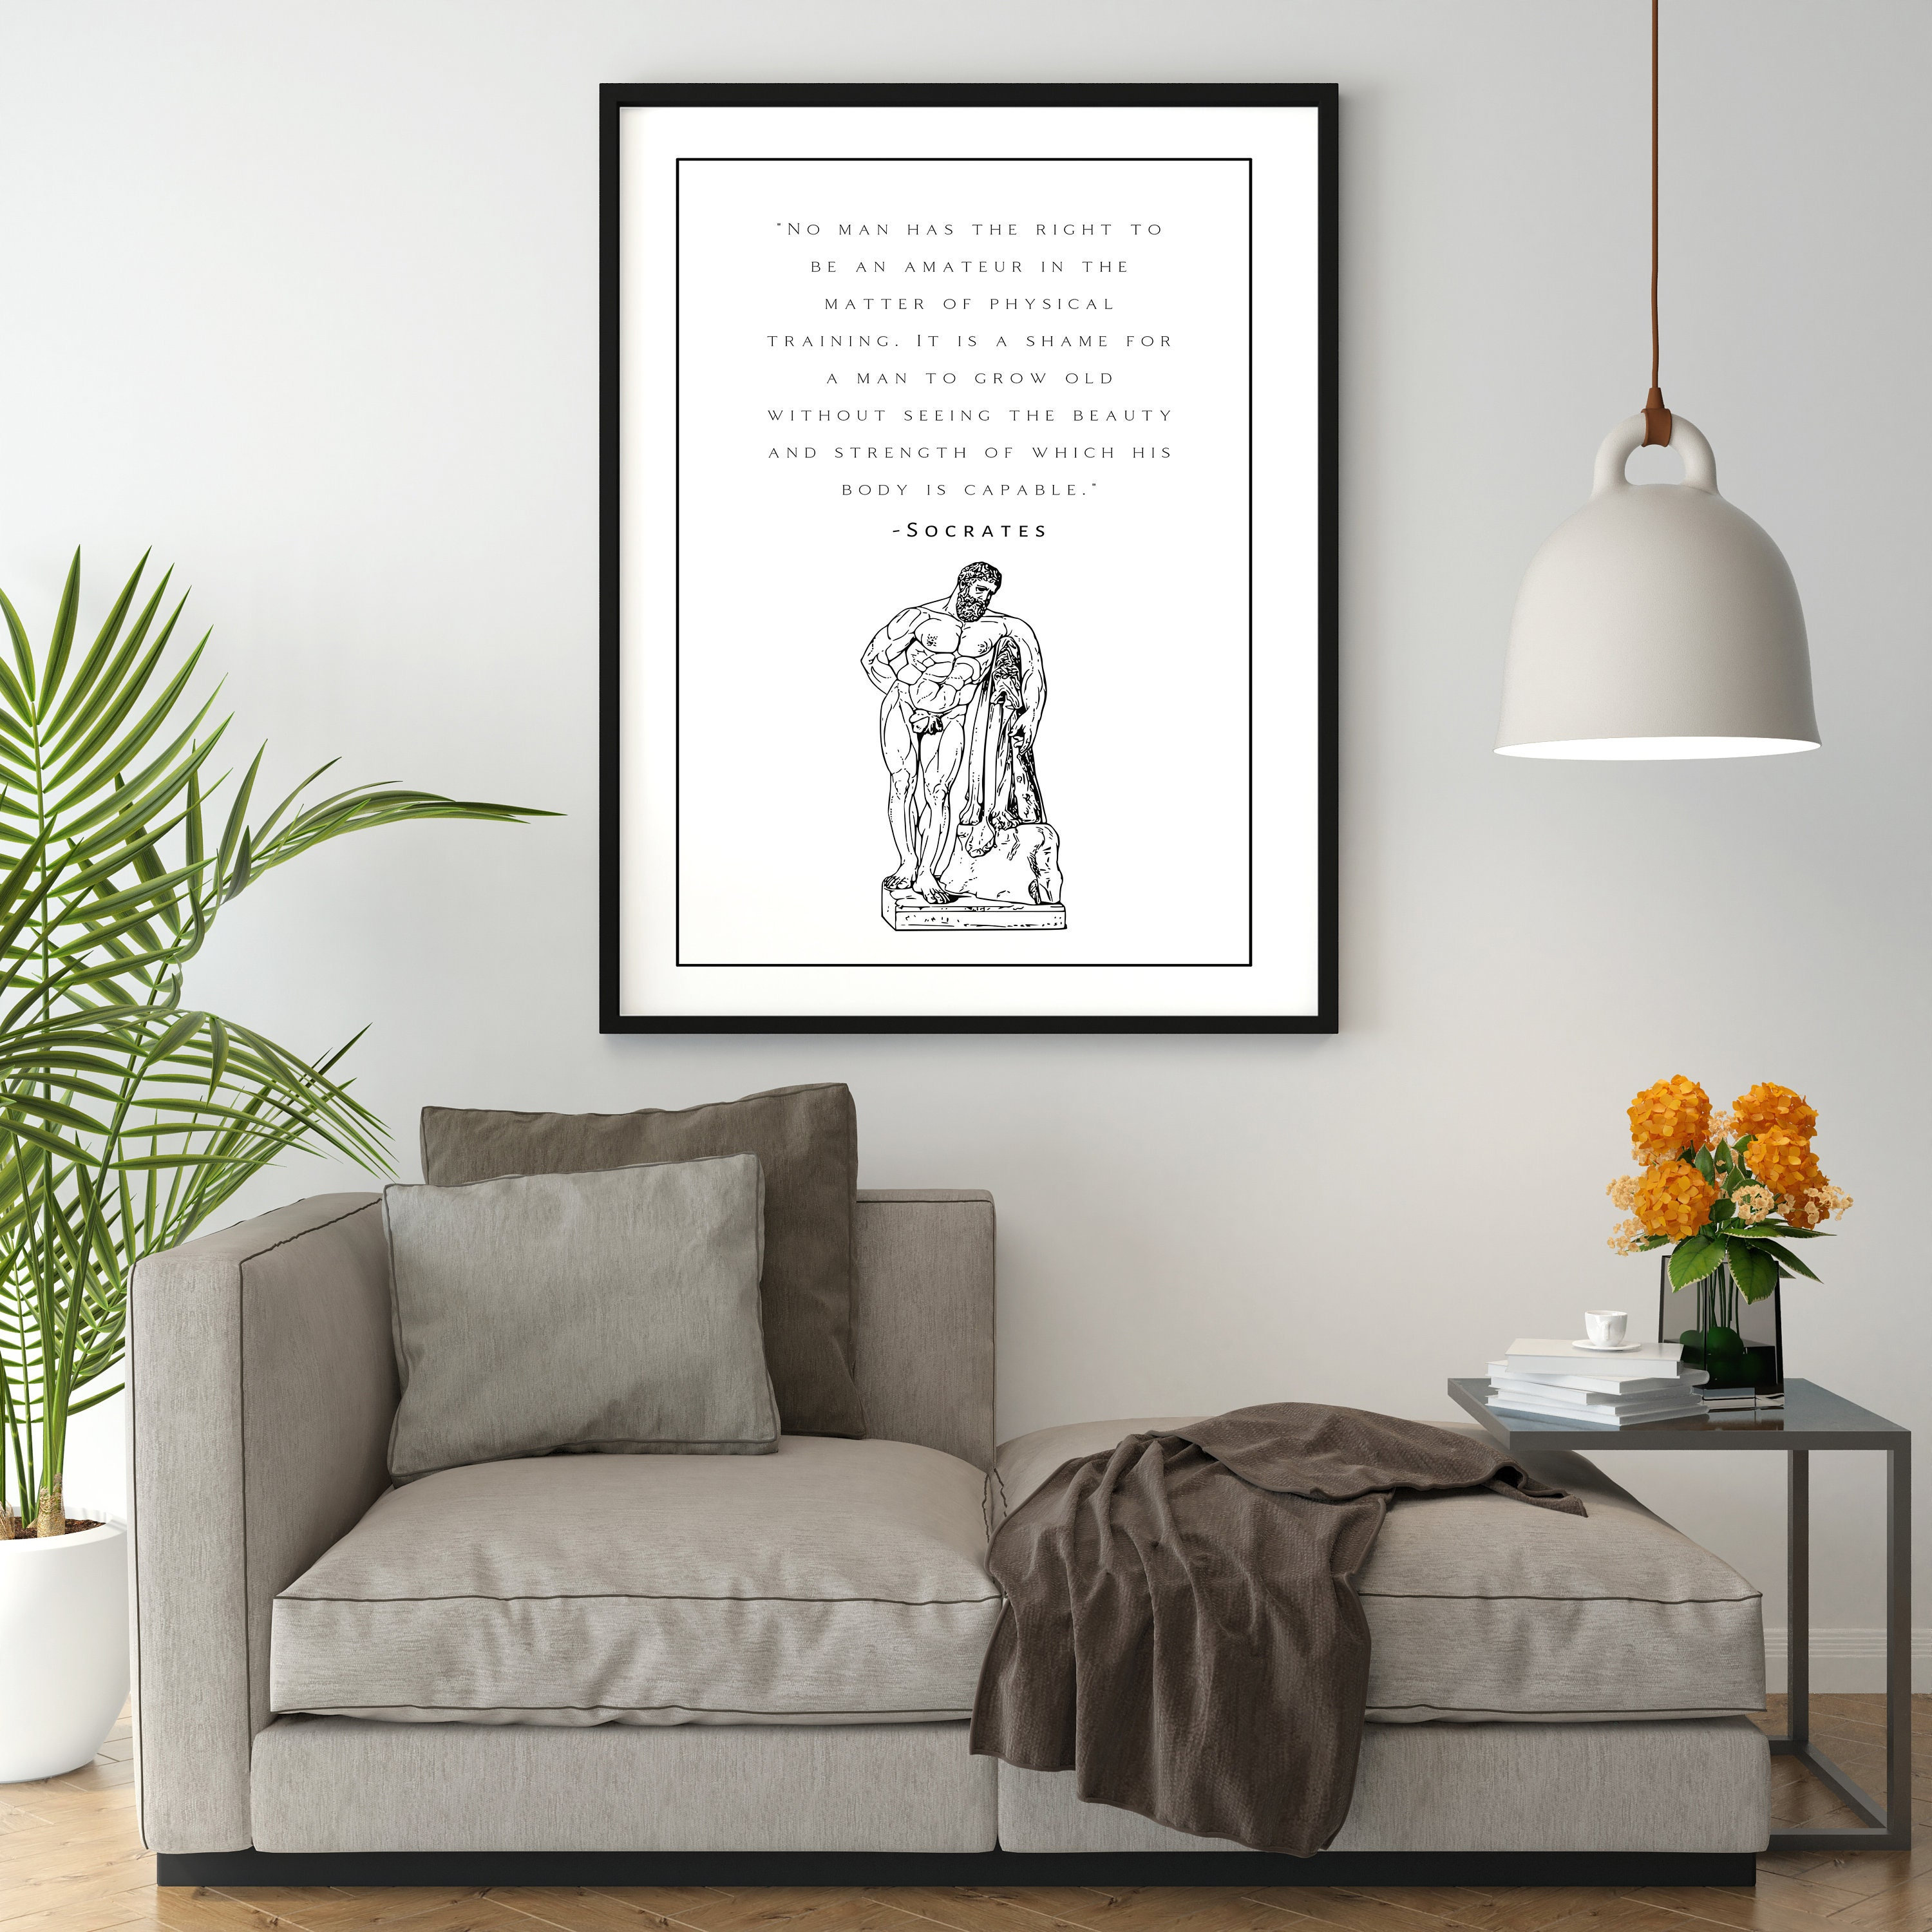 Socrates Poem Posters Motivational Quote Art Print Poetry pic pic